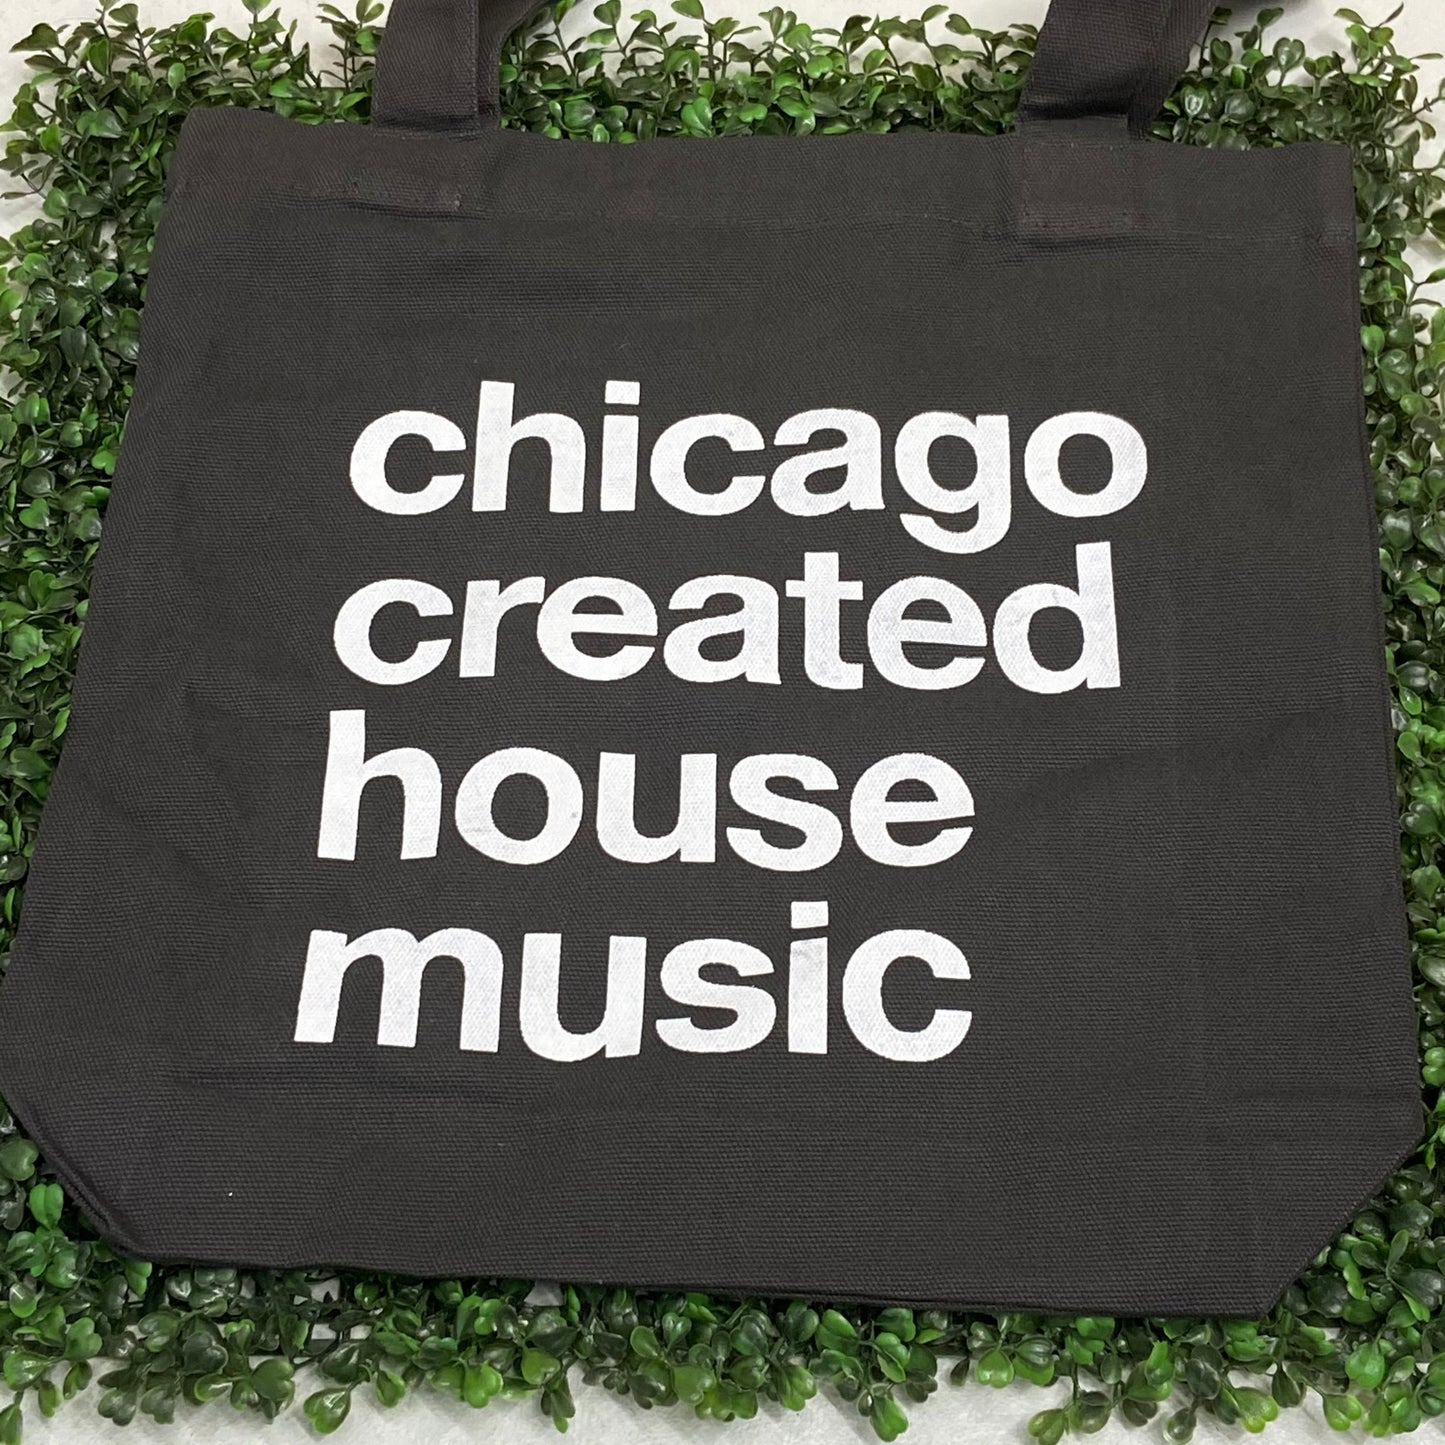 Silverroom | Chicago Created House Music Tote Bag